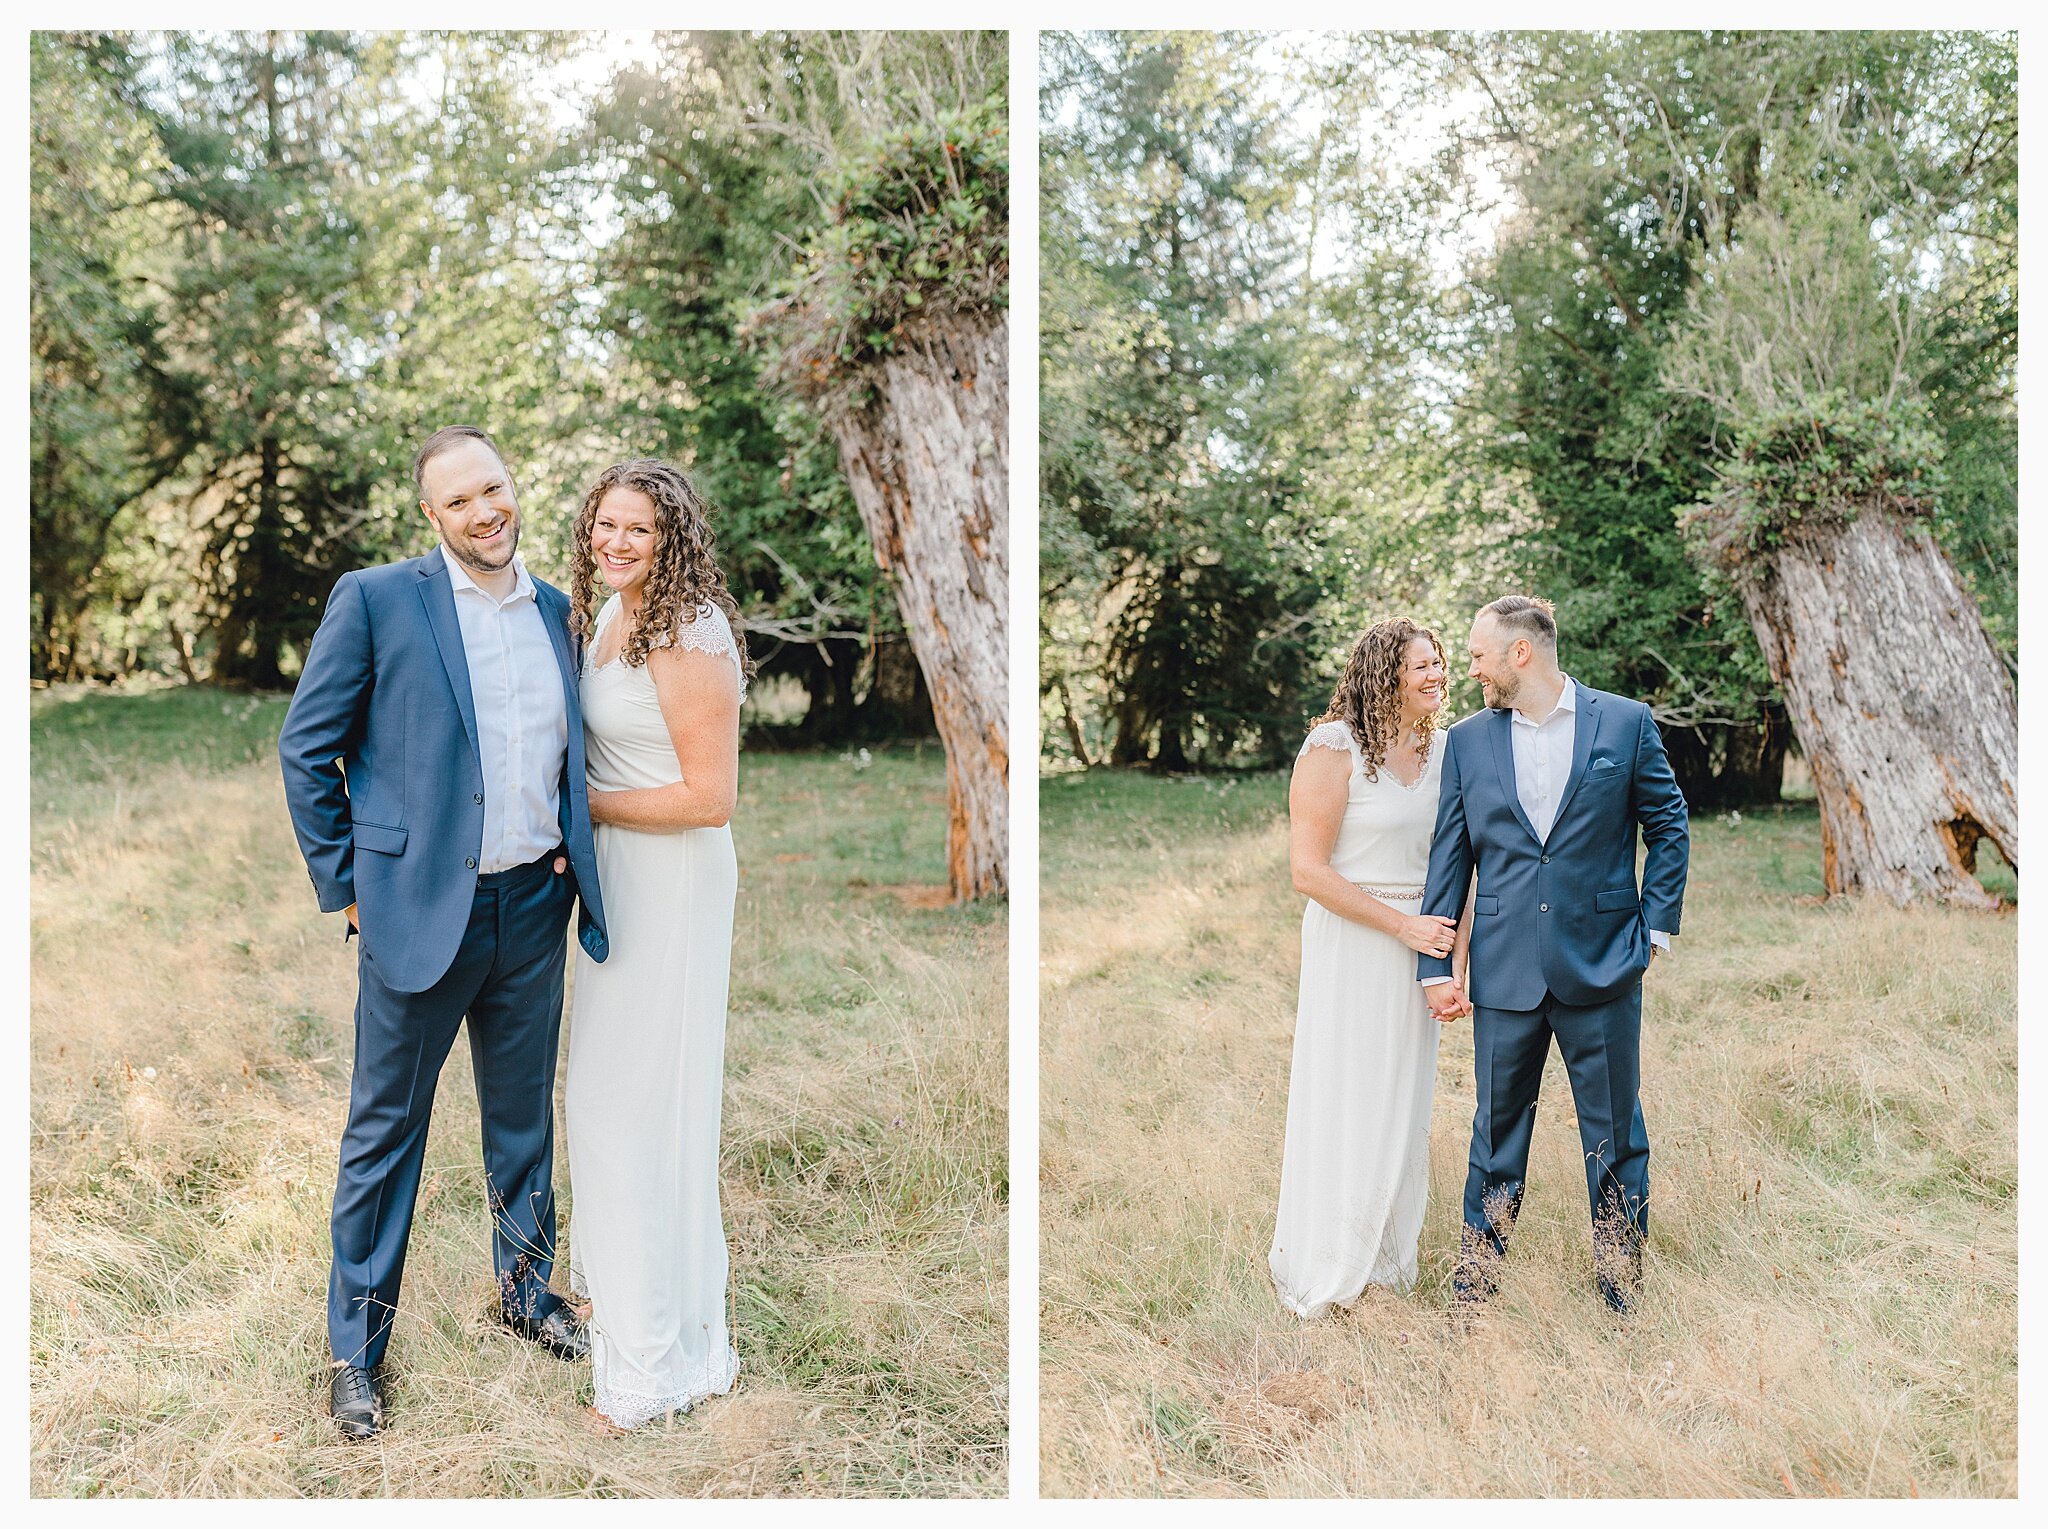 Emma Rose Company Light and Airy Wedding and Engagement Photographer, Seattle and PNW, Rose Ranch_0018.jpg